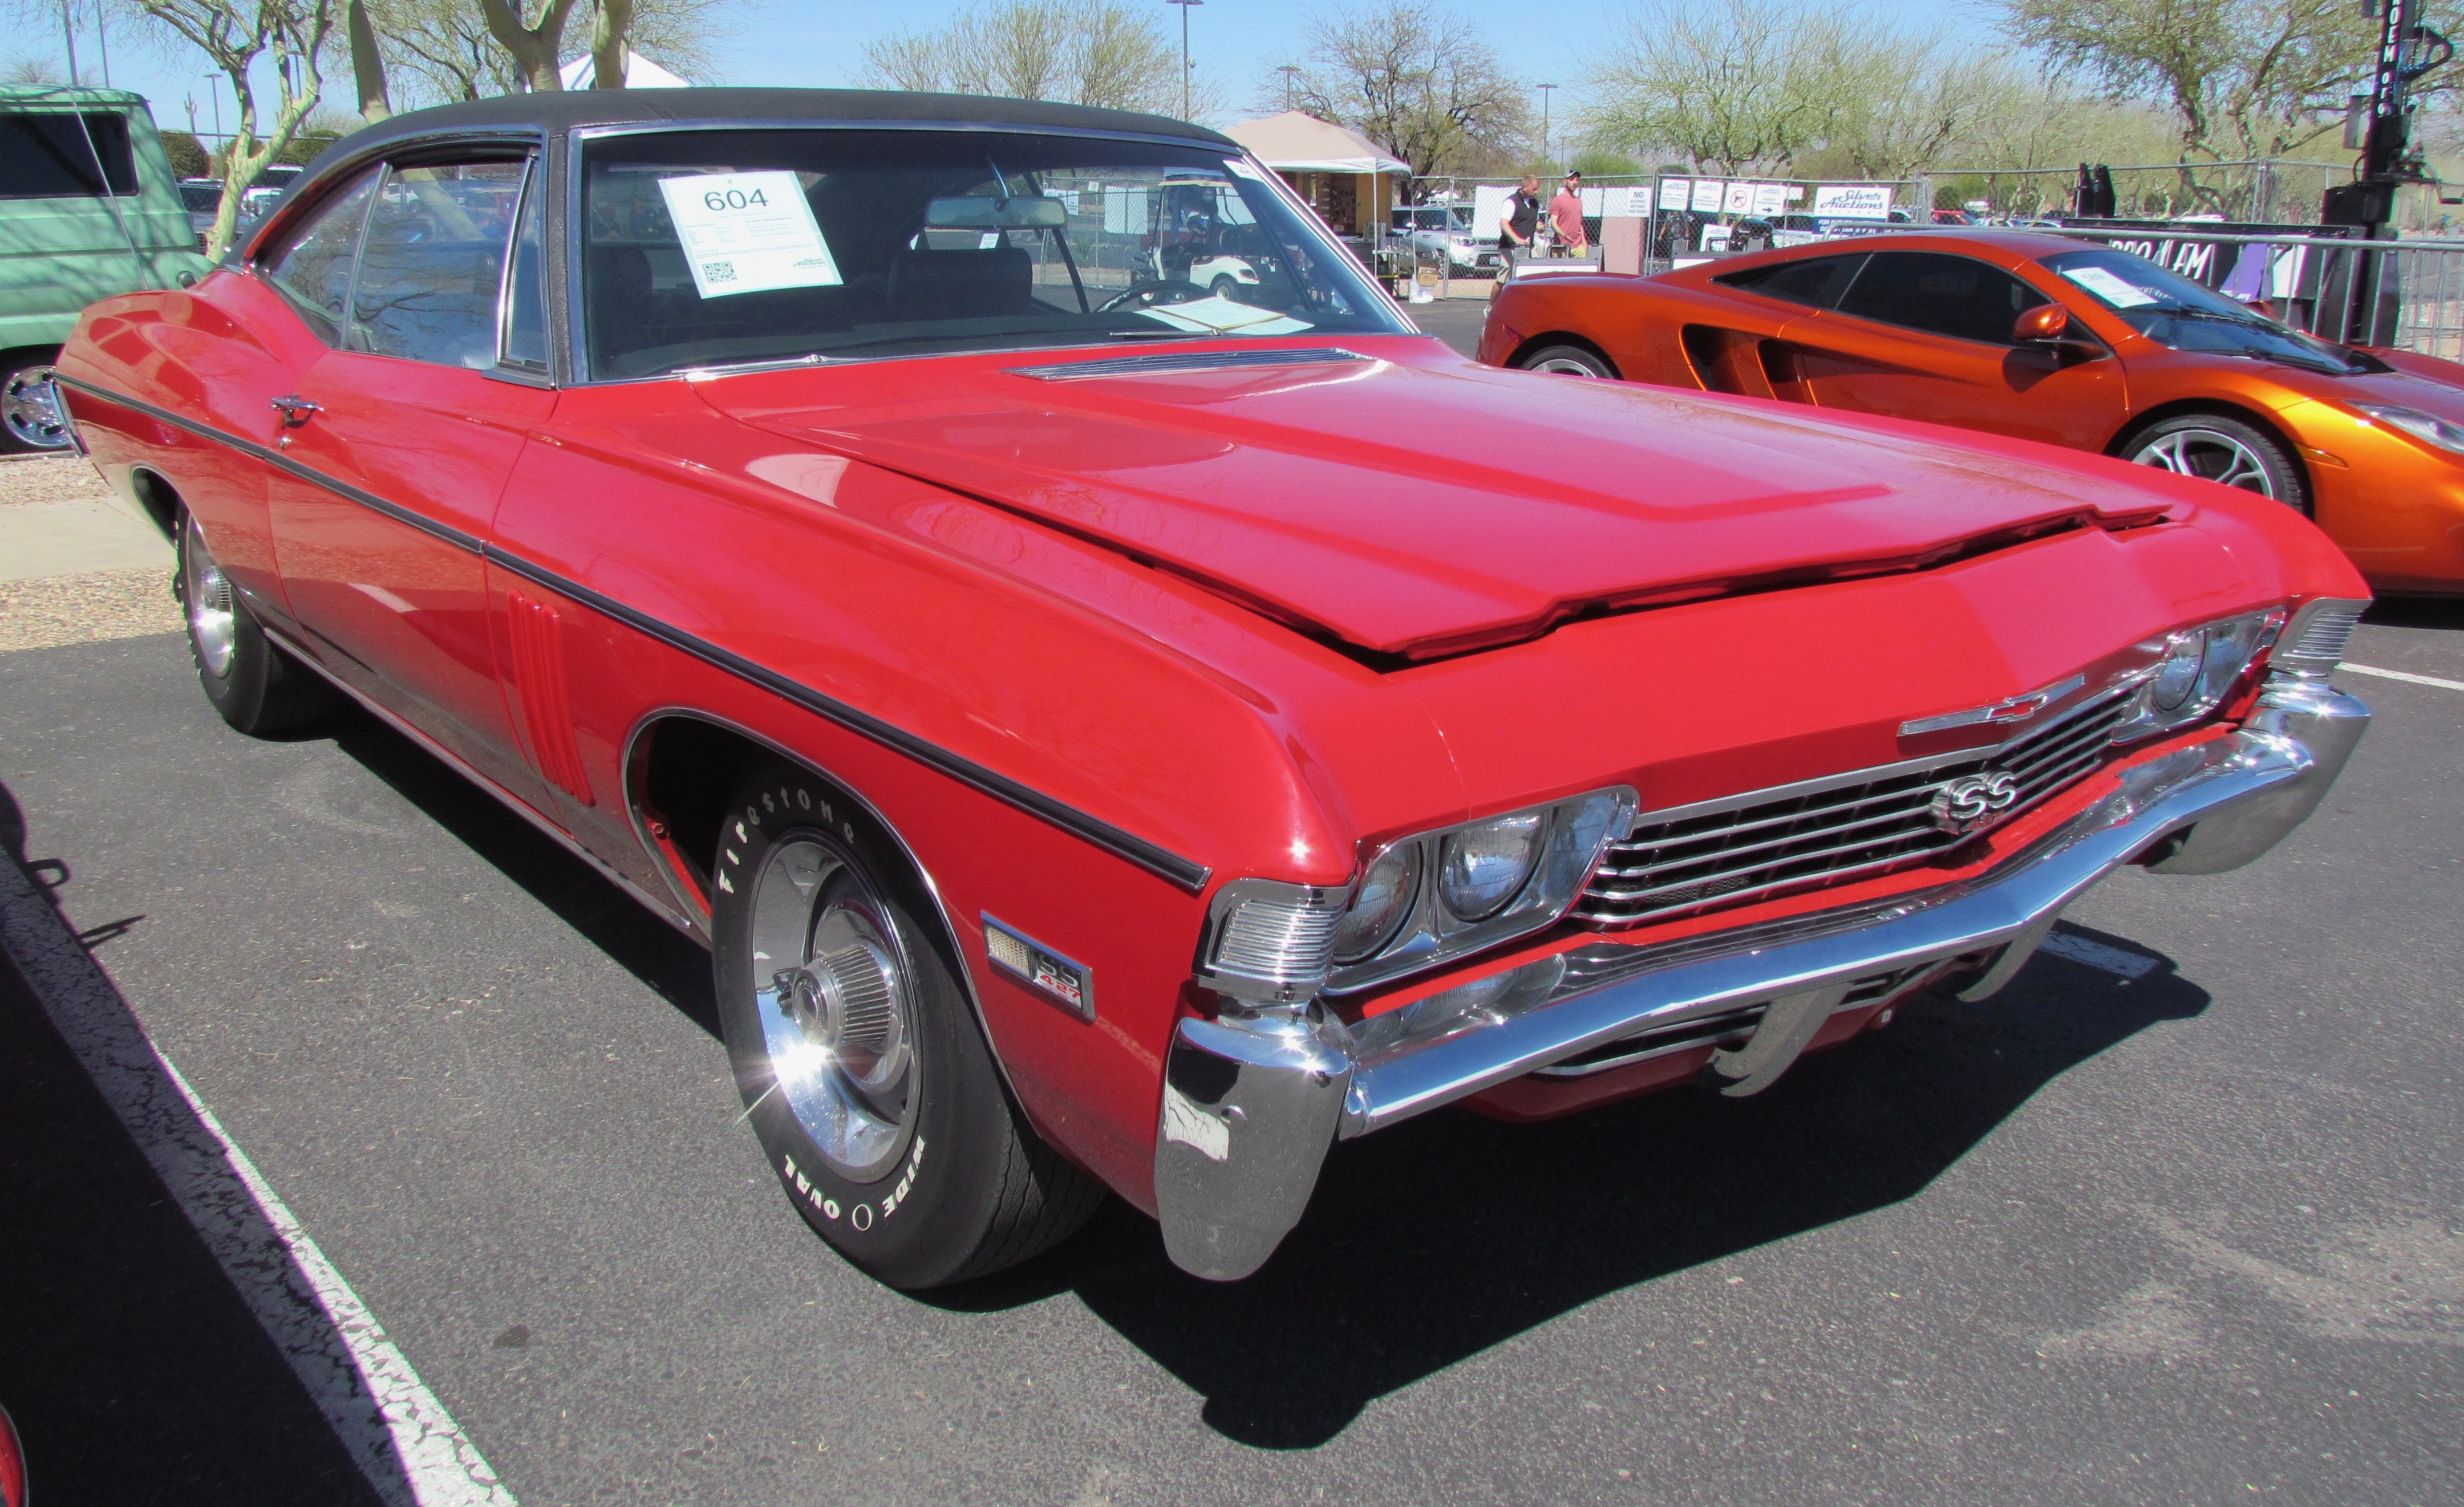 Silver Auctions, Larry’s likes at Silver Auctions Arizona’s Spring Sale, ClassicCars.com Journal